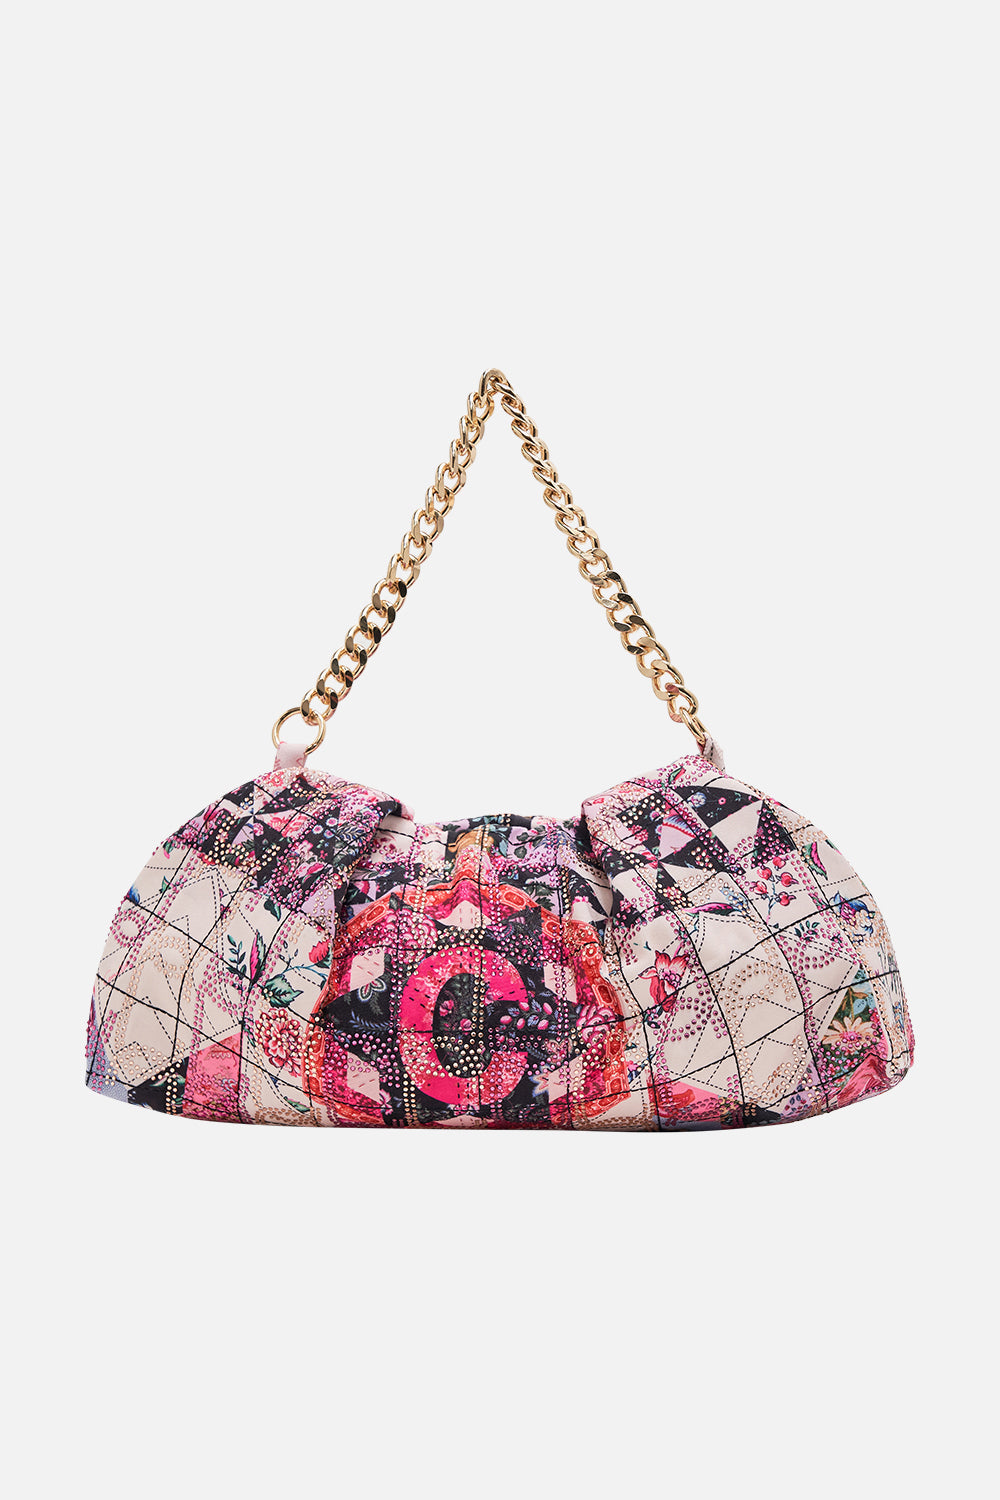 CAMILLA floral oversized clutch with chain in Patchwork Poetry